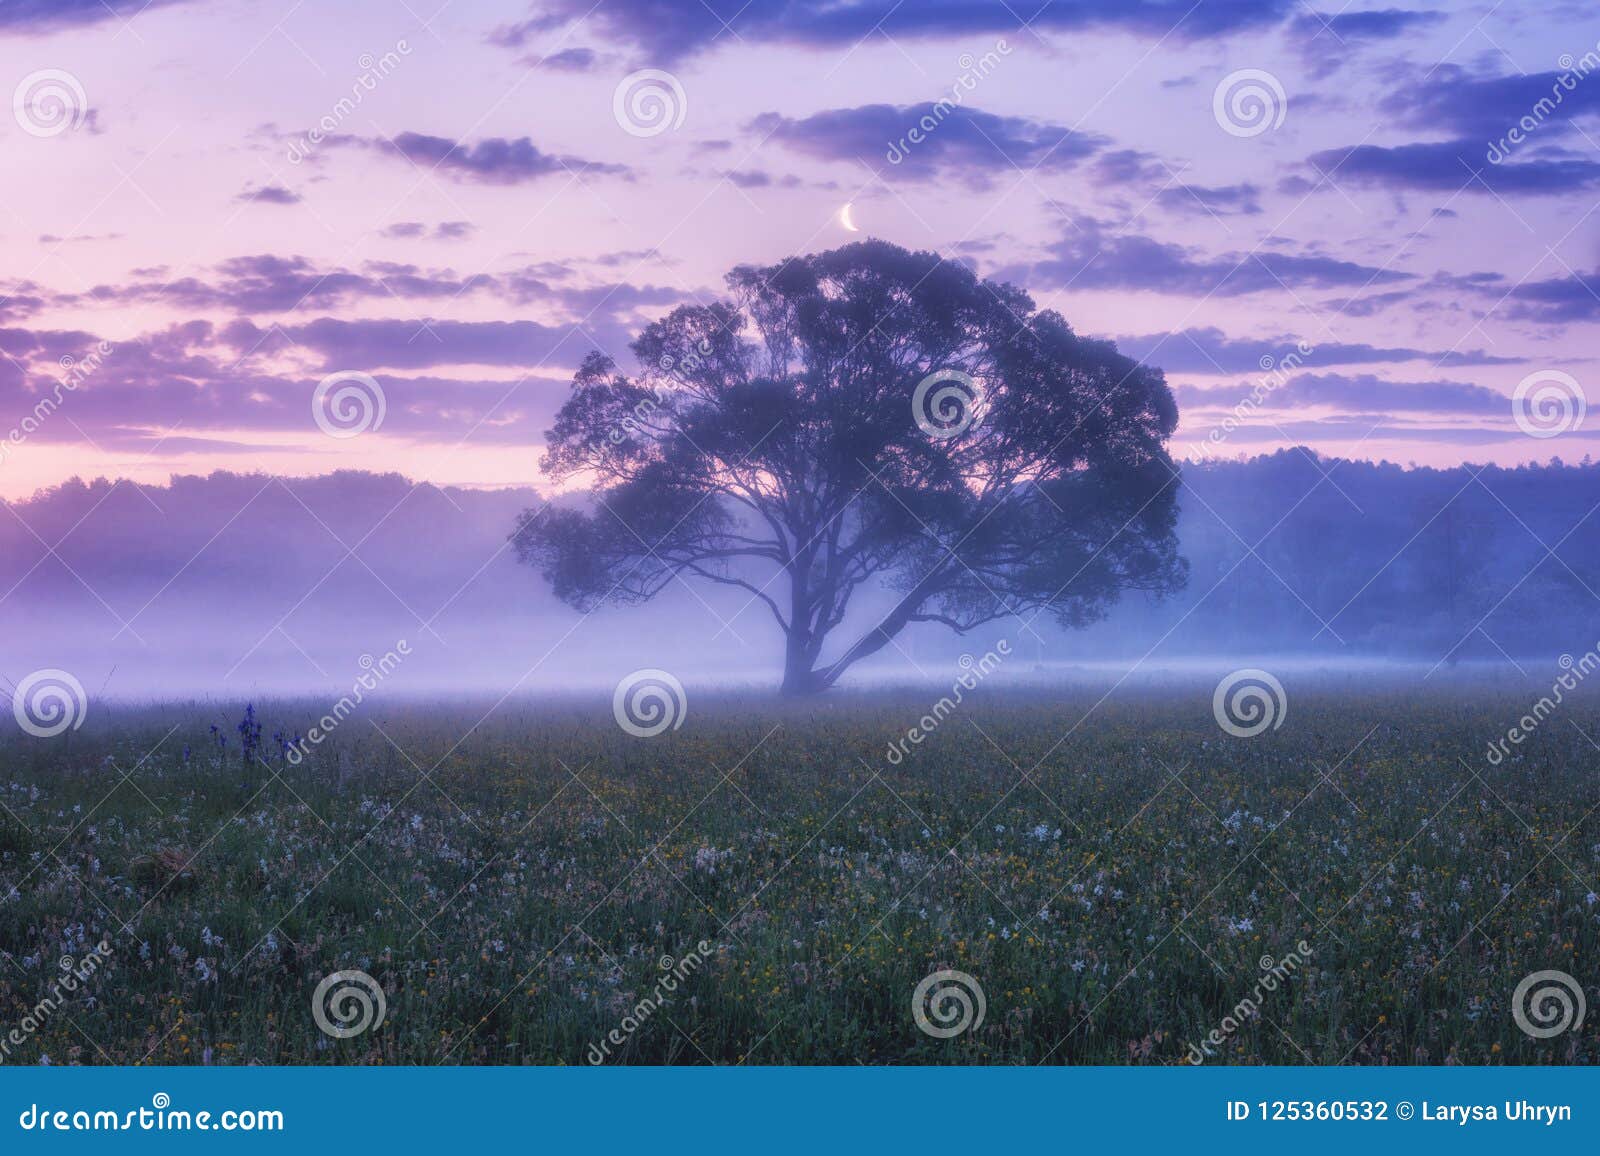 misty flowering valley at dawn, scenic landscape with wild growing flowers, single tree and color cloudy sky